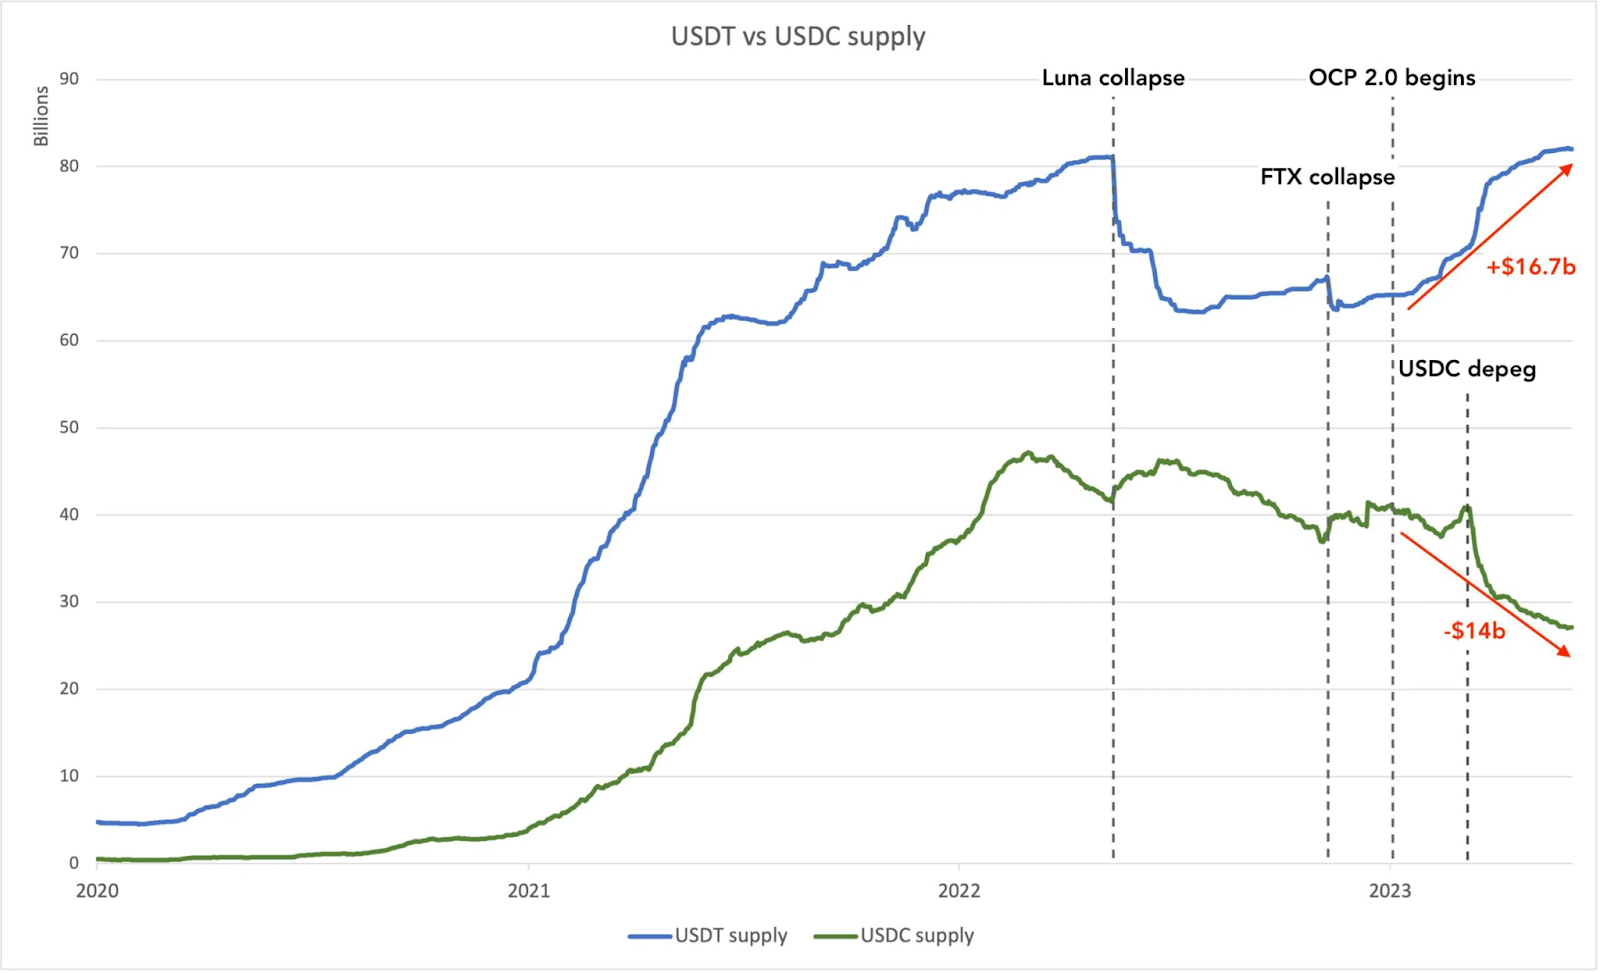 A chart showing the divergence in the USDT and USDC Stablecoin supply with notable events in the industry to display historic moments and their impacts.